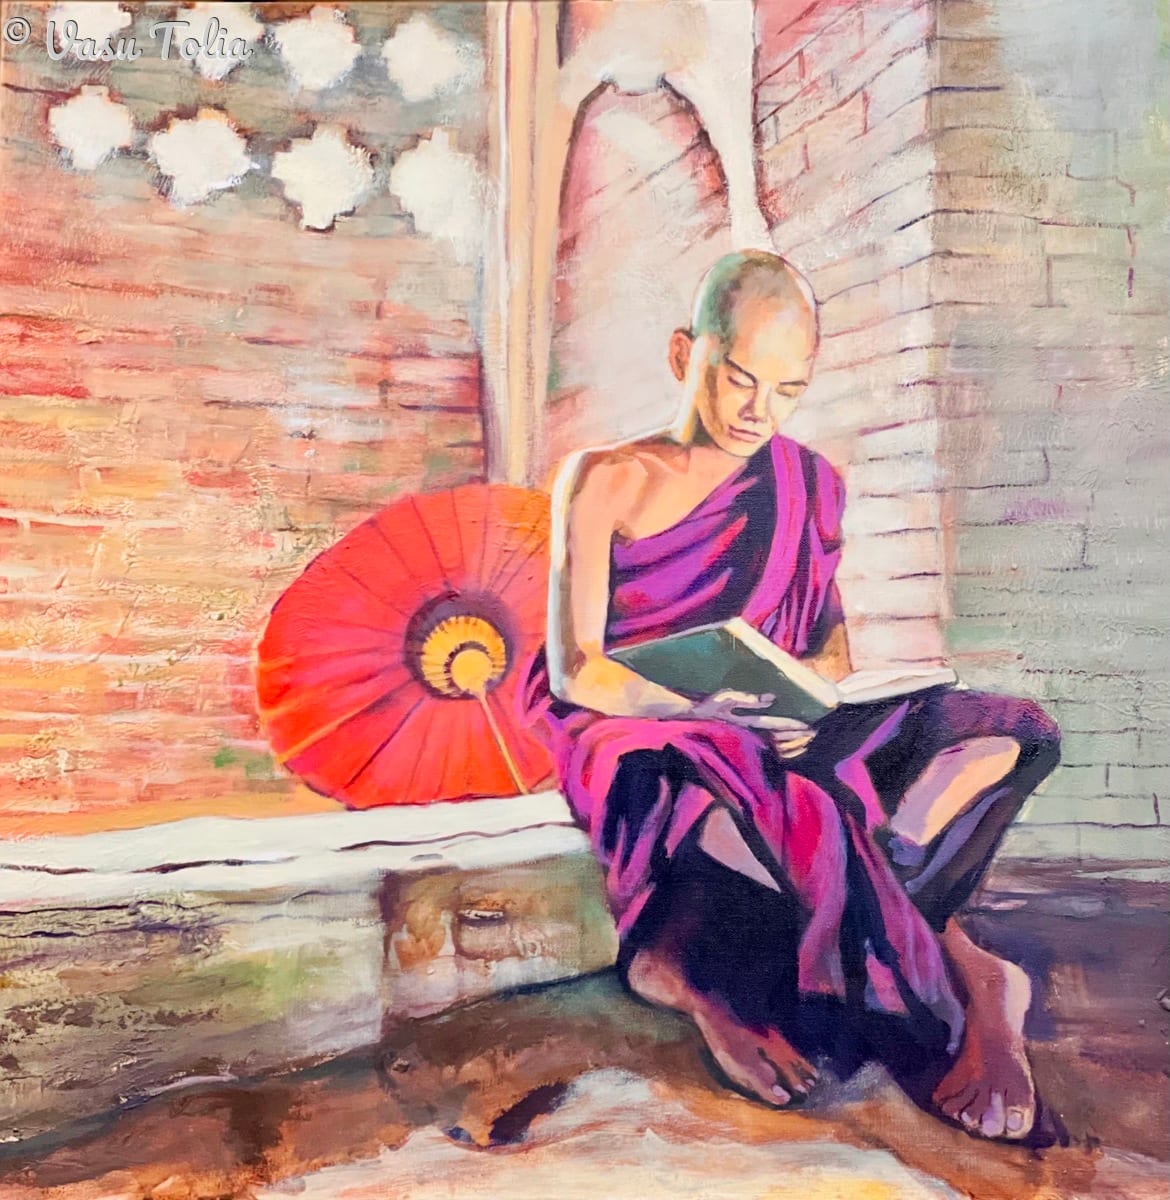 Learning curve by Vasu Tolia  Image: "Learning Curve" illustrates the journey of personal growth and discovery. The open window represents new opportunities and the light of knowledge pouring in. This piece captures the emotional highs and lows experienced during the process of learning, where each curve leads to greater understanding and self-awareness. It depicts a young monk in rich maroon and red, representing the doorway to a state of serenity and spiritual awareness  within the stillness of one's mind.